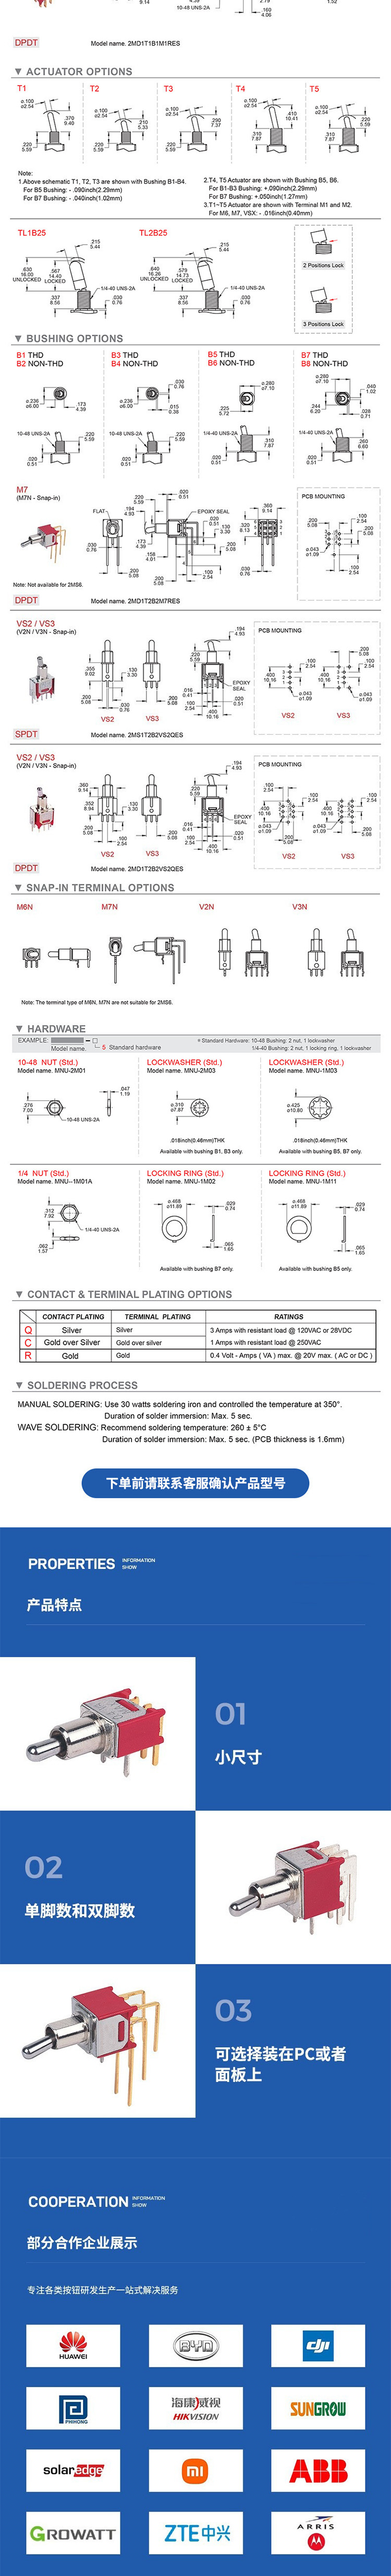 Prevent misoperation of the lock button switch, and the current of the lock rocker switch is 2A-15A